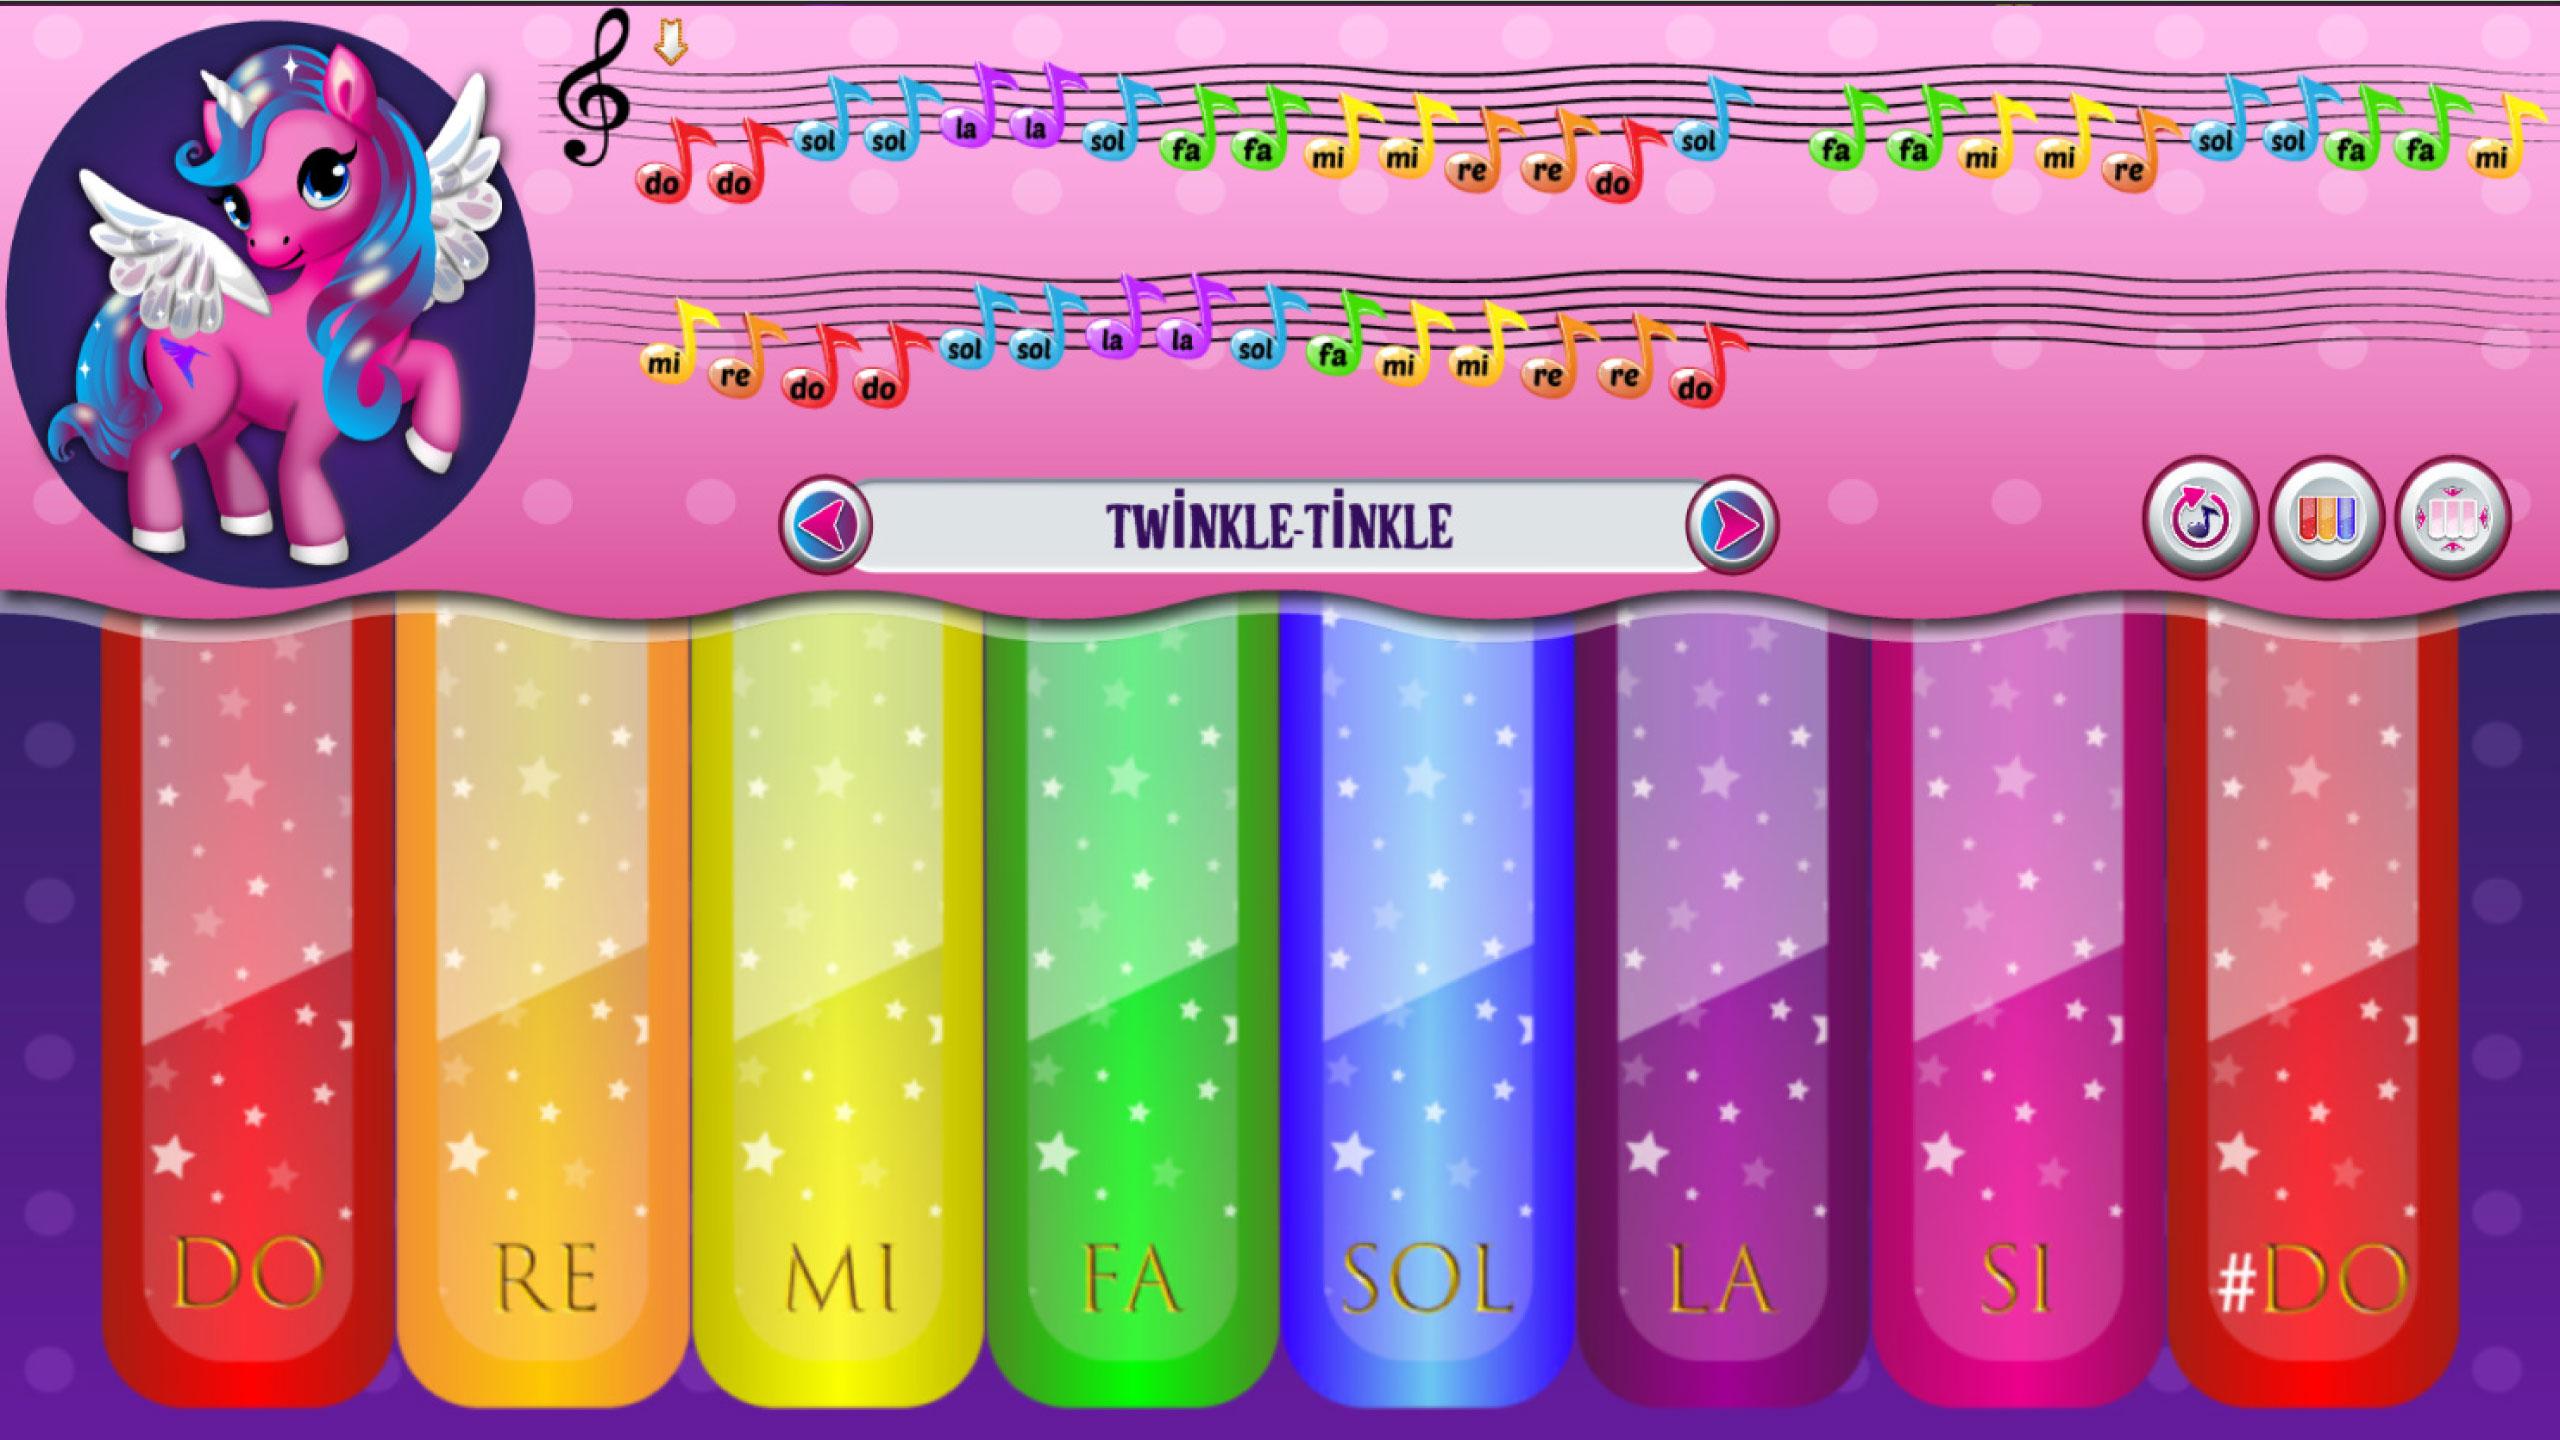 My Colorful Litle Pony Instrument - Piano 2.0 Screenshot 20